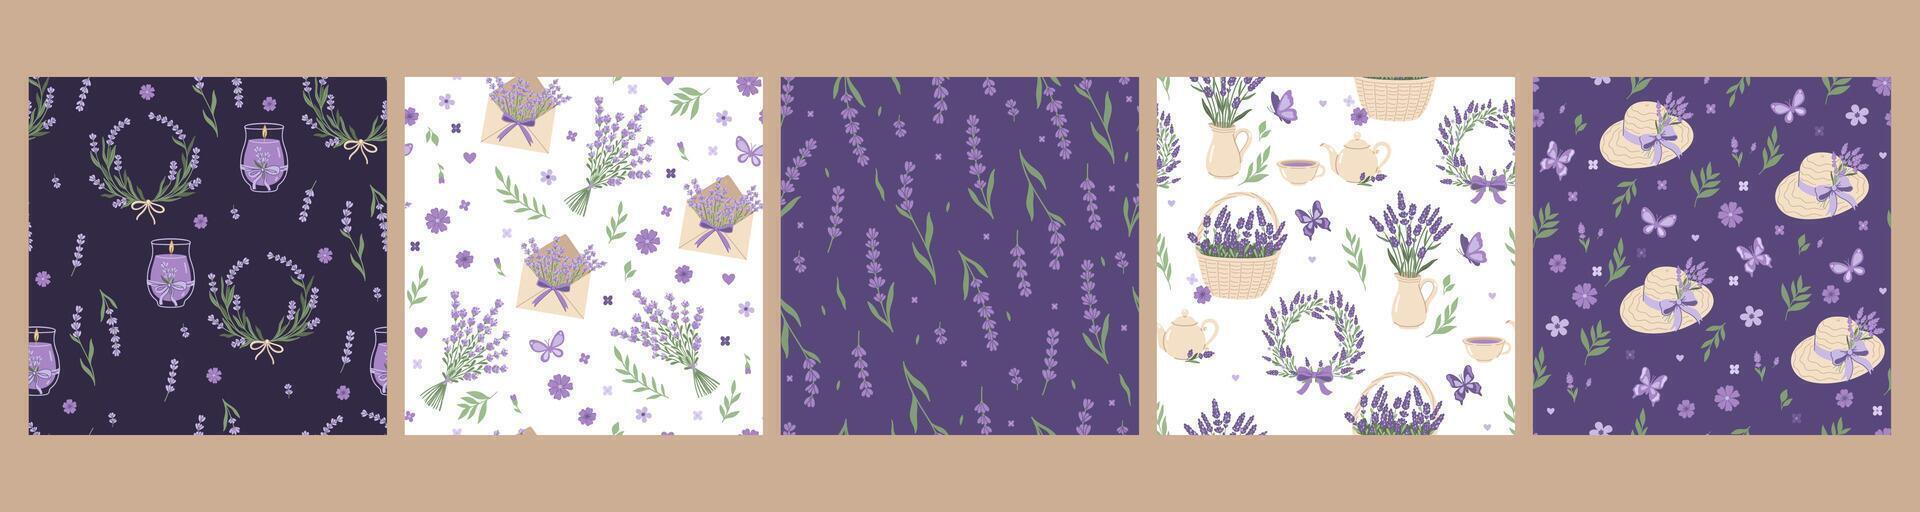 Set of seamless patterns with lavender flowers. Vector graphics.